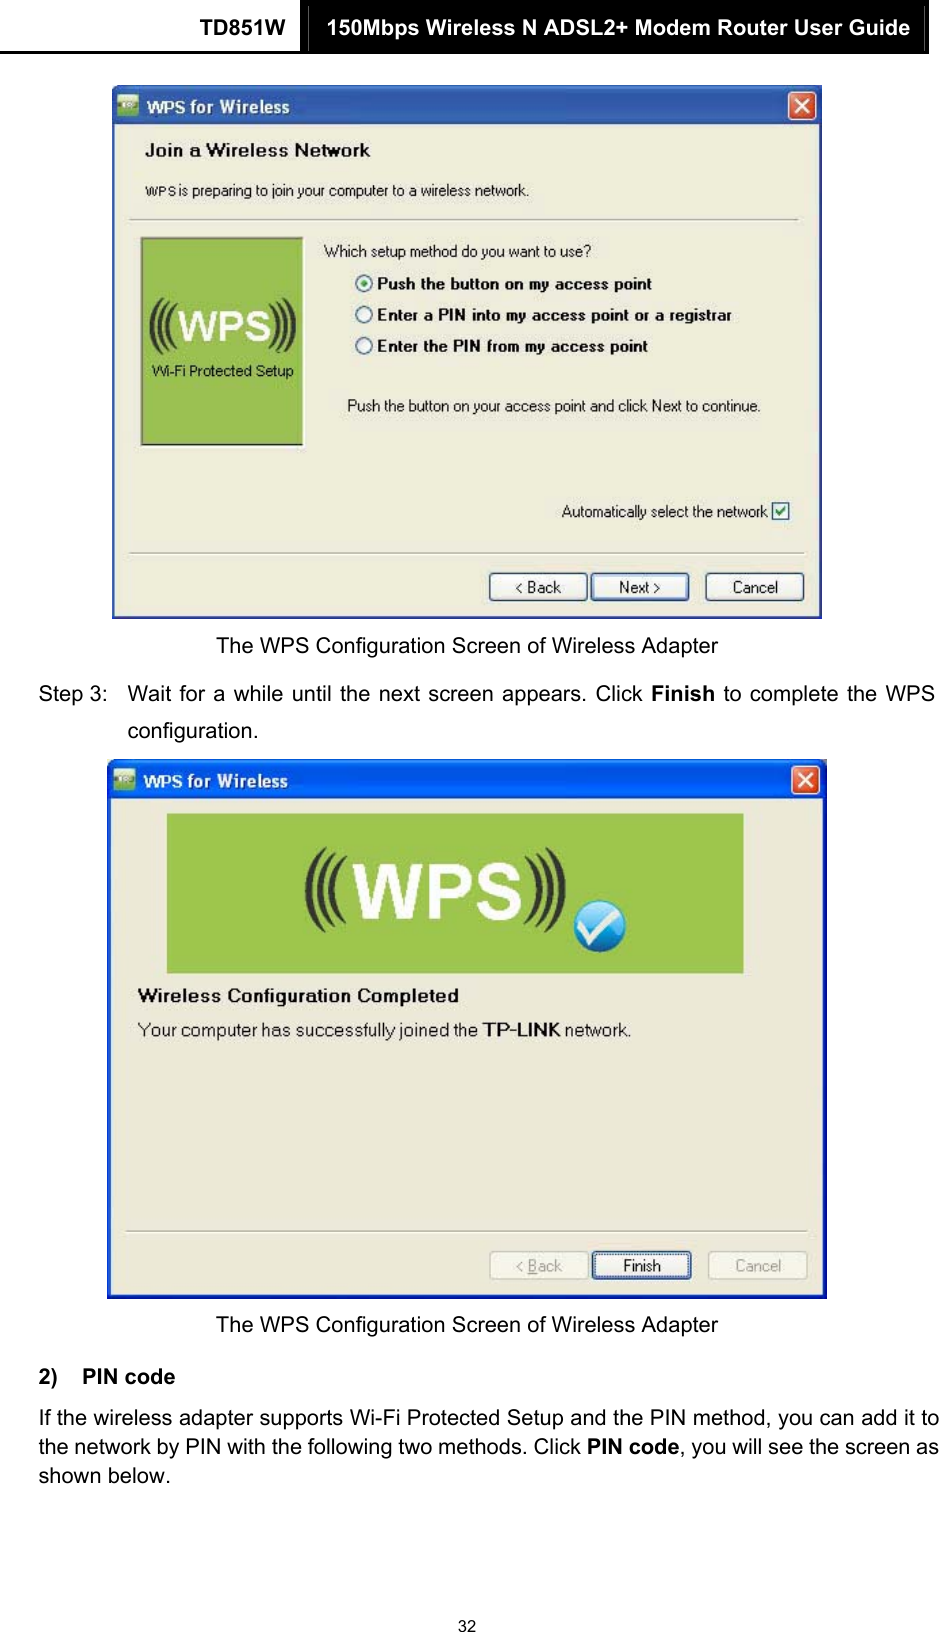 TD851W  150Mbps Wireless N ADSL2+ Modem Router User Guide 32  The WPS Configuration Screen of Wireless Adapter Step 3:  Wait for a while until the next screen appears. Click Finish to complete the WPS configuration.  The WPS Configuration Screen of Wireless Adapter   2) PIN code If the wireless adapter supports Wi-Fi Protected Setup and the PIN method, you can add it to the network by PIN with the following two methods. Click PIN code, you will see the screen as shown below. 